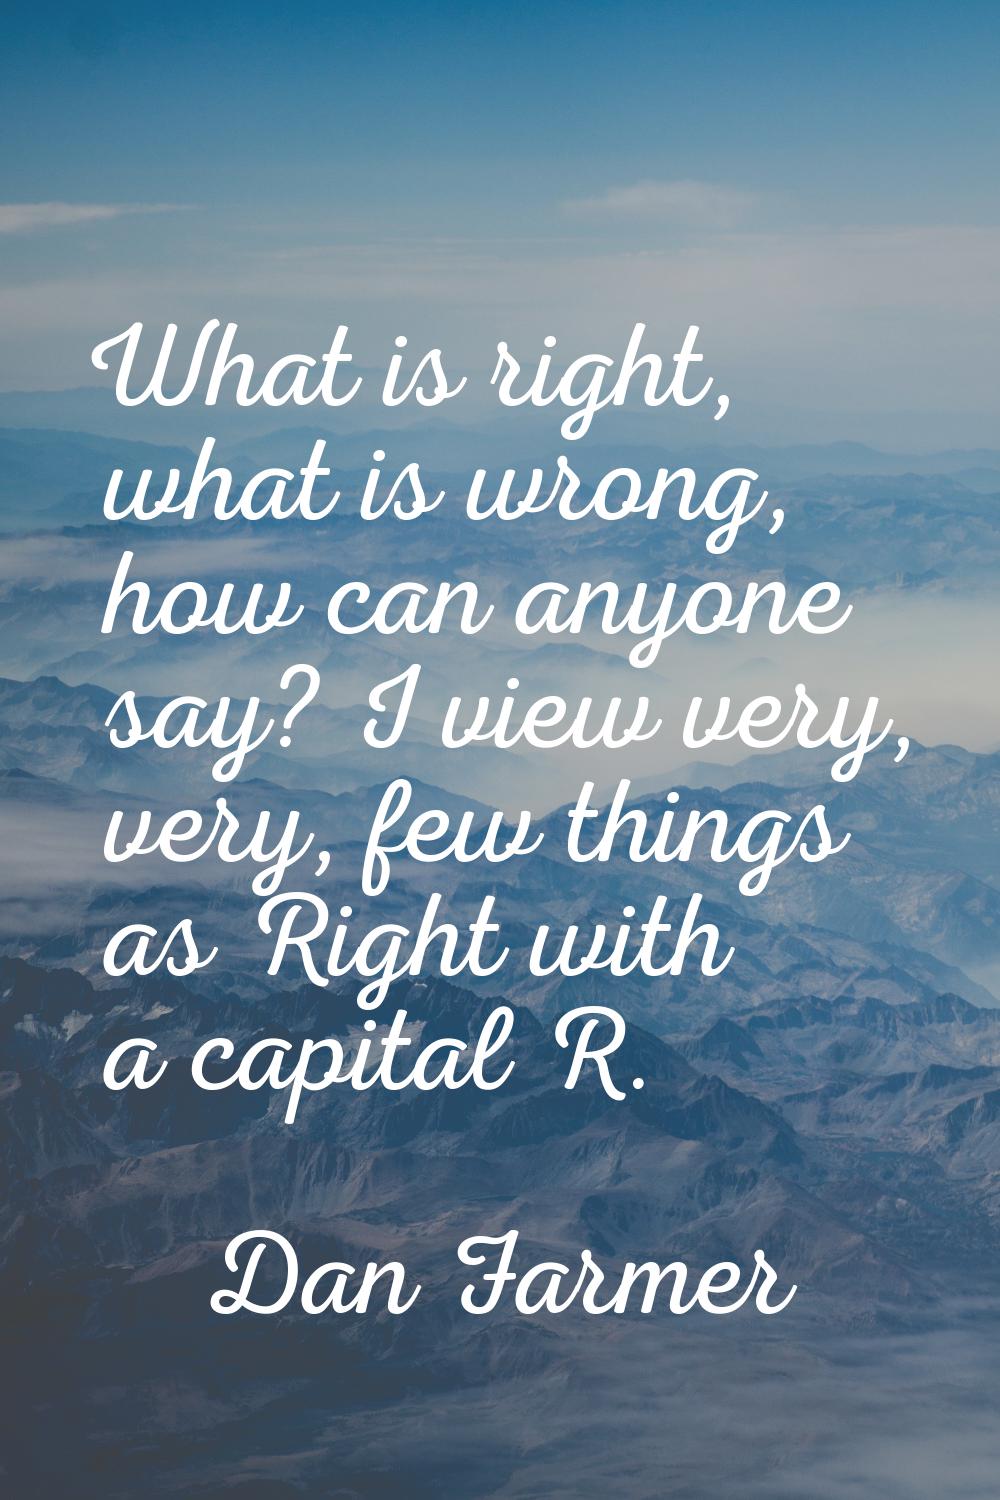 What is right, what is wrong, how can anyone say? I view very, very, few things as Right with a cap